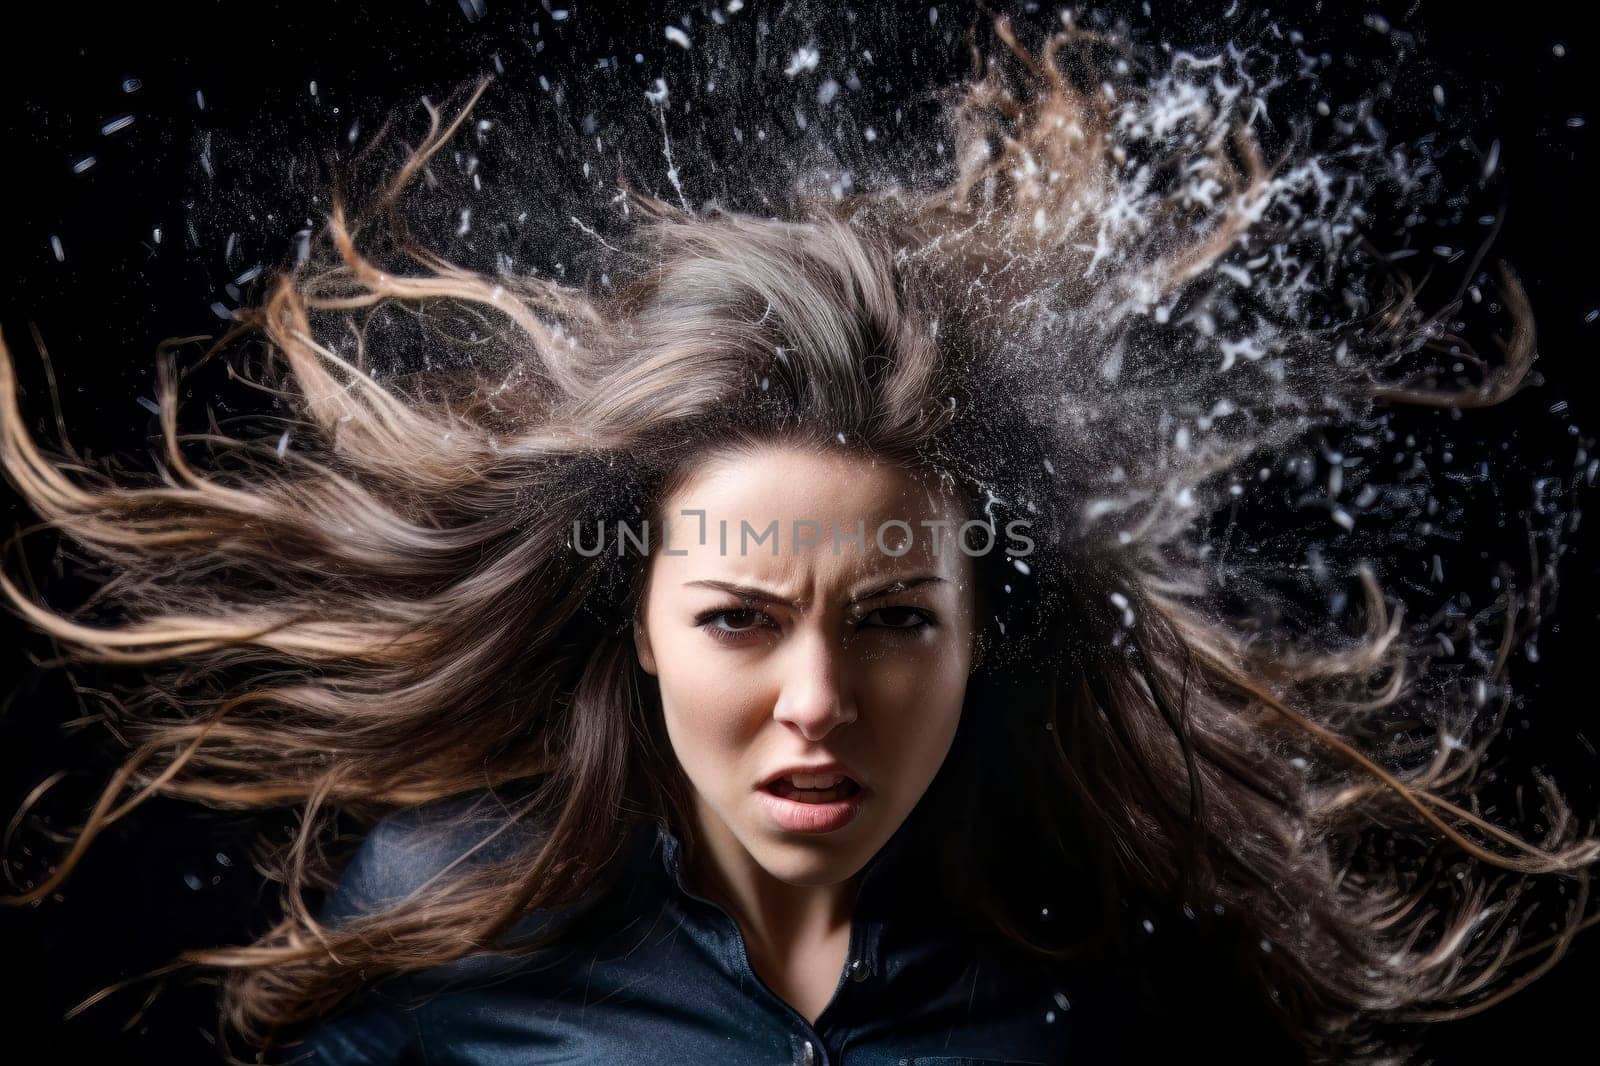 Furious Girl with Windblown Hair by pippocarlot